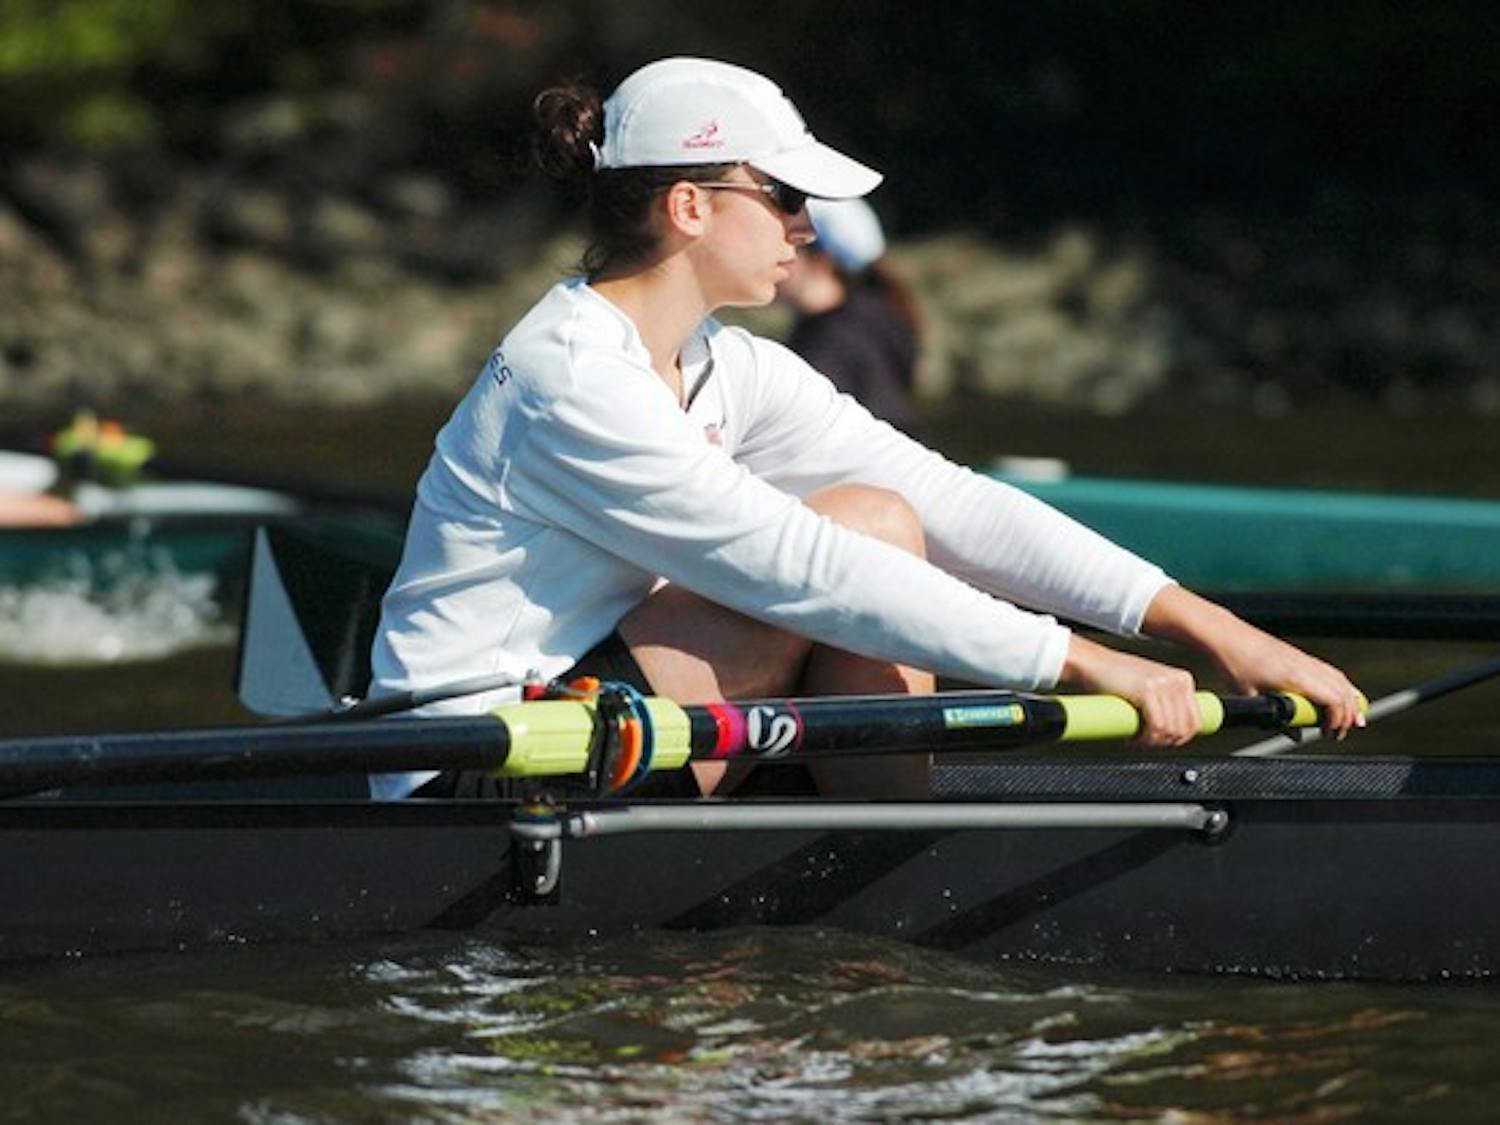 Kate Davison '07 will look to rejoin the Under-23 boat that she helped lead to a gold medal last summer.